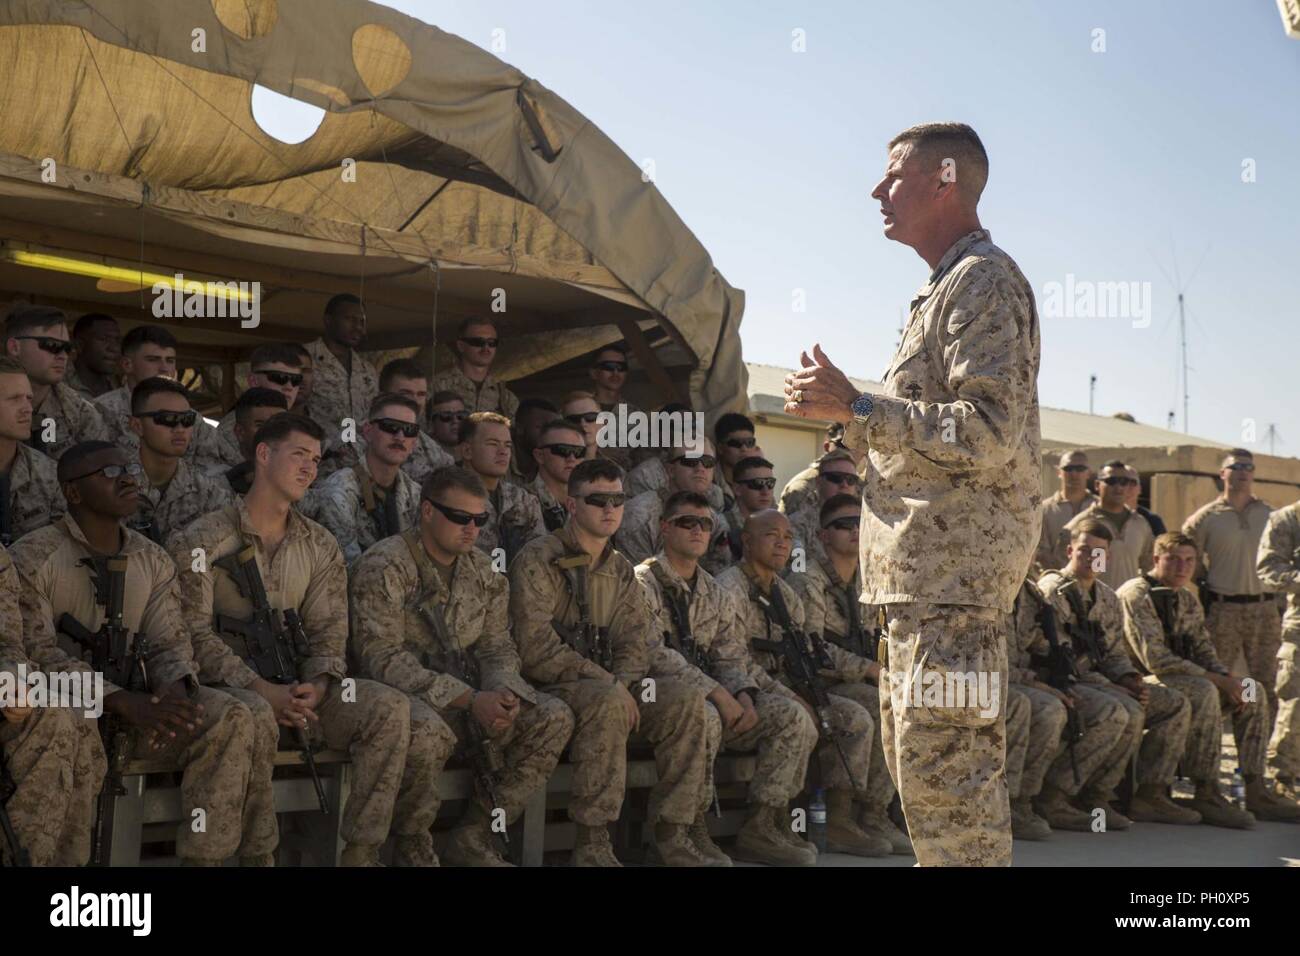 HELMAND PROVINCE, Afghanistan (June 19, 2018) - U.S. Marine Corps Lt. Gen. William D. Beydler, the commanding general for Marine Corps Forces Central Command, praises the service members with Task Force Southwest (TFSW) for their performance. Beydler visited Camp Shorab to show his appreciation to TFSW for the work they’ve done in Helmand Province. Stock Photo